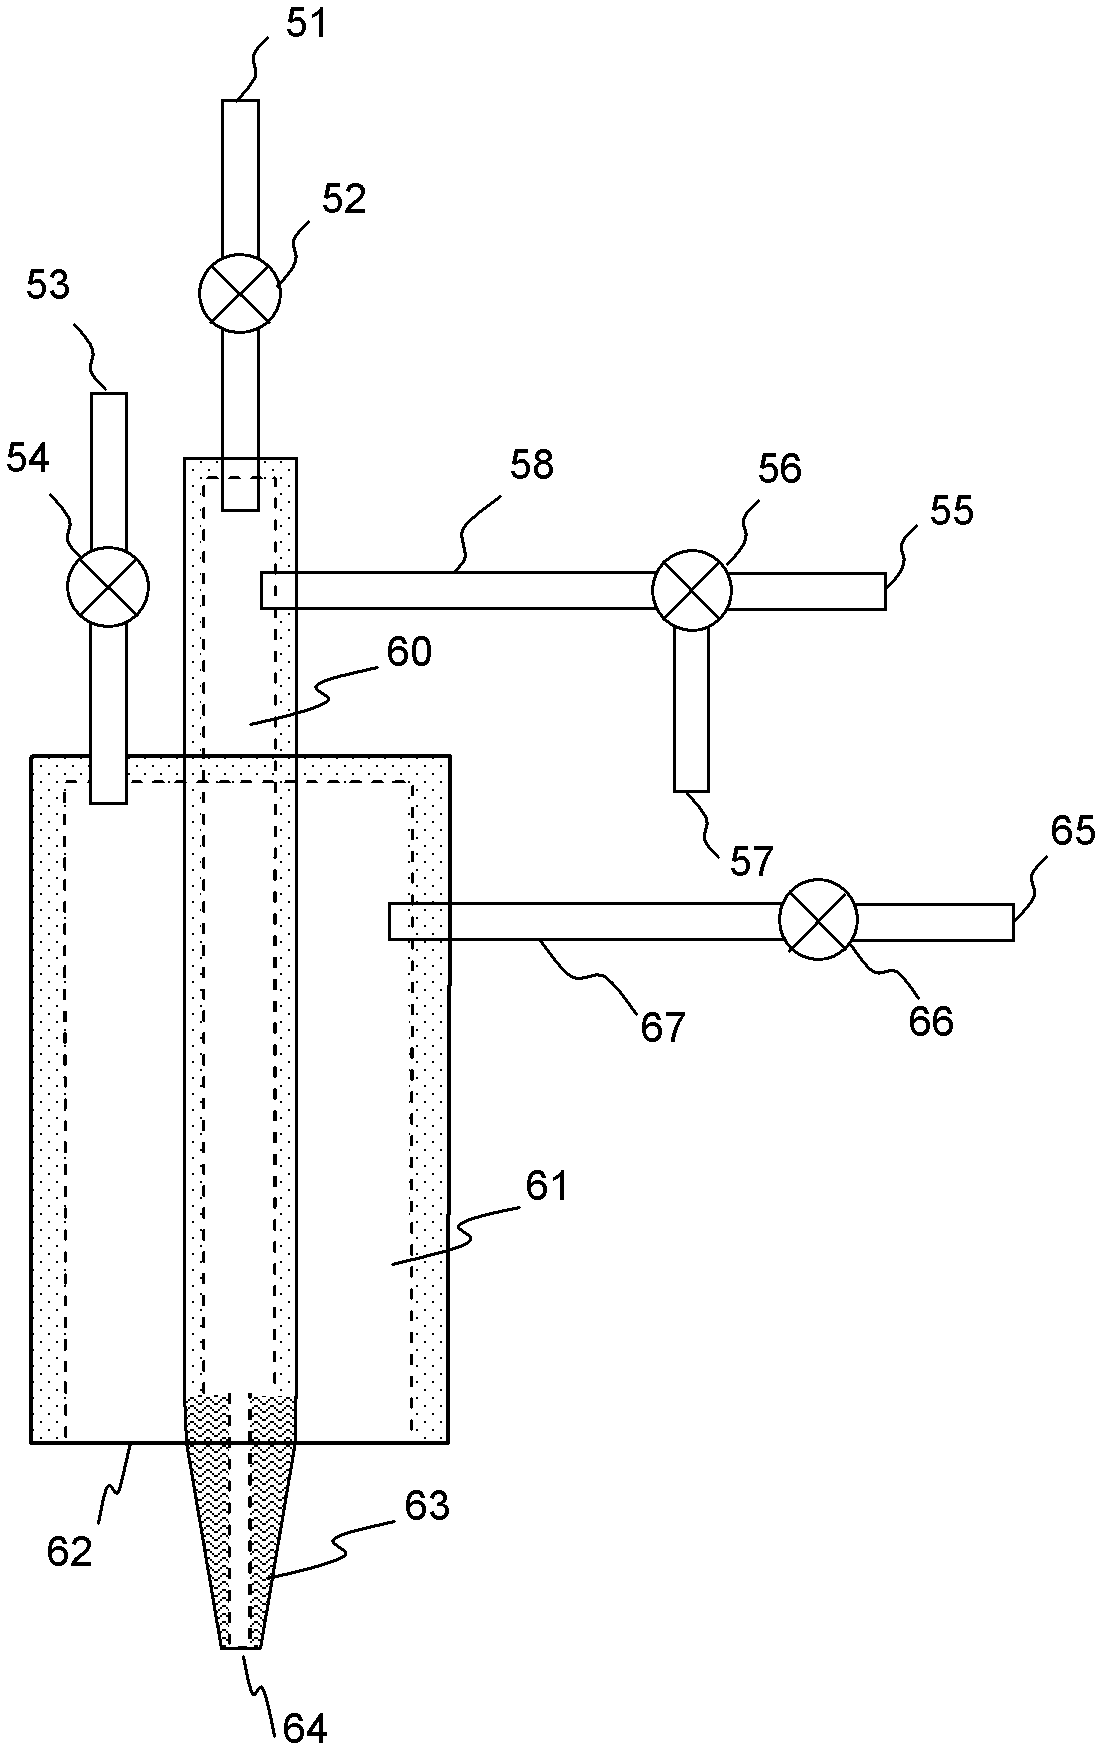 Flow measurement system for detecting tumor cells and analysis and monitoring method